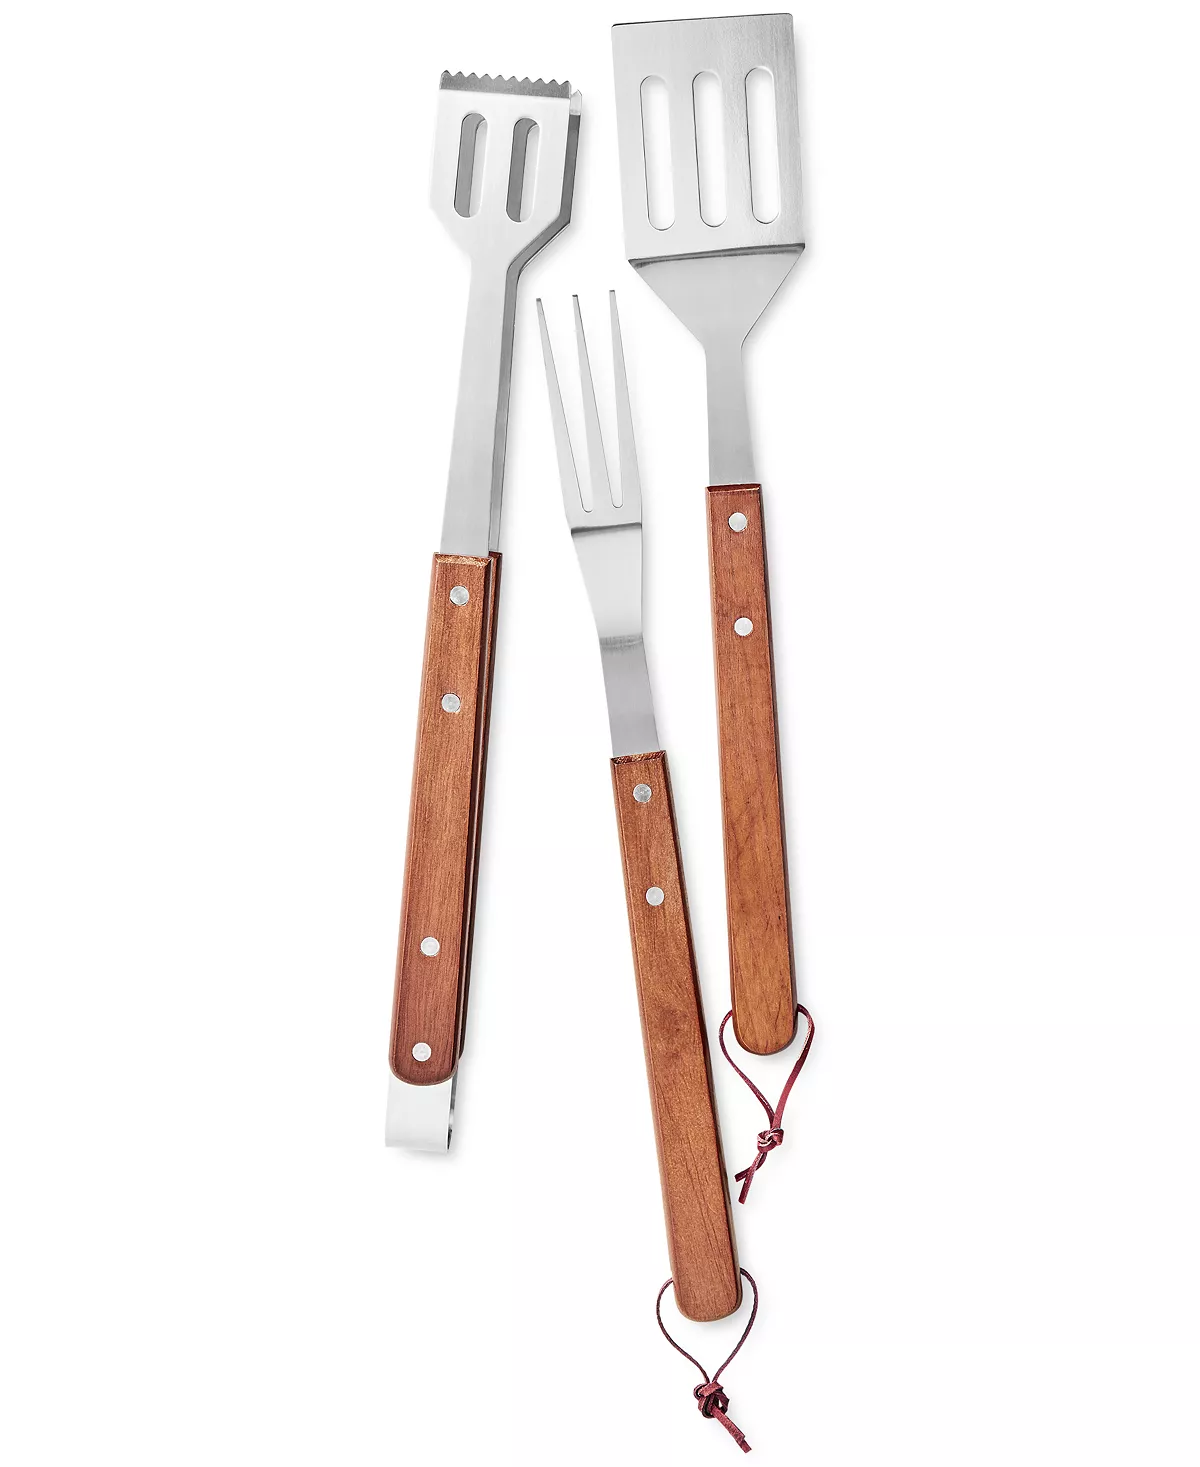 Martha Stewart Collection BBQ 3-Pc Wood Handled Tool Set, Created for Macy's & Reviews - Kitchen Gadgets - Kitchen - Macy's BBQ工具三件套